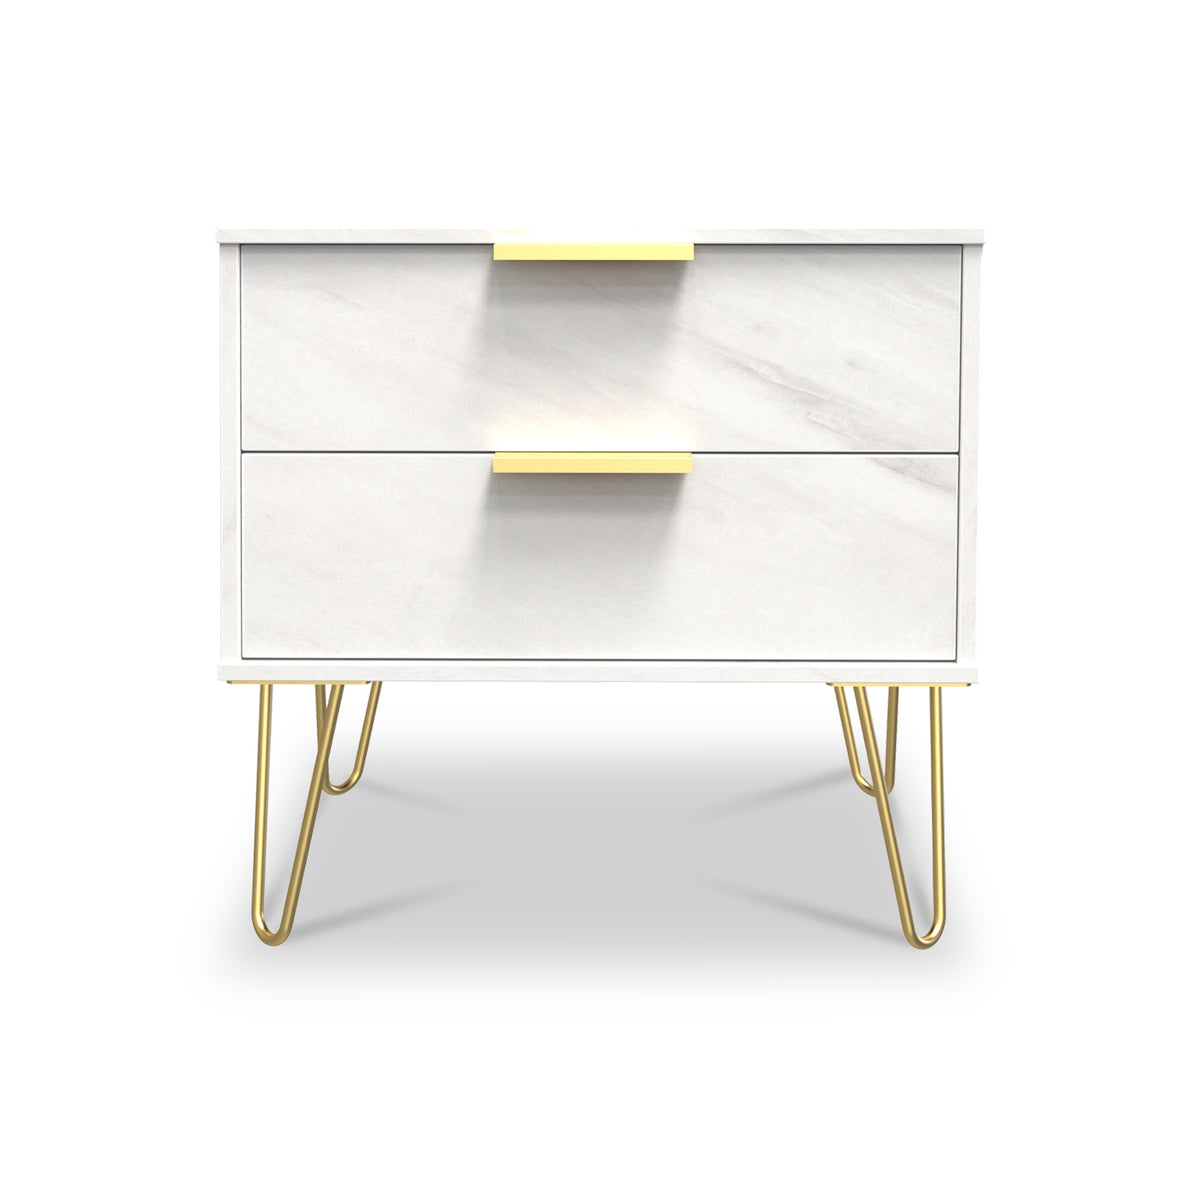 Moreno Marble Effect 2 Drawer Side Table from Roseland Furniture